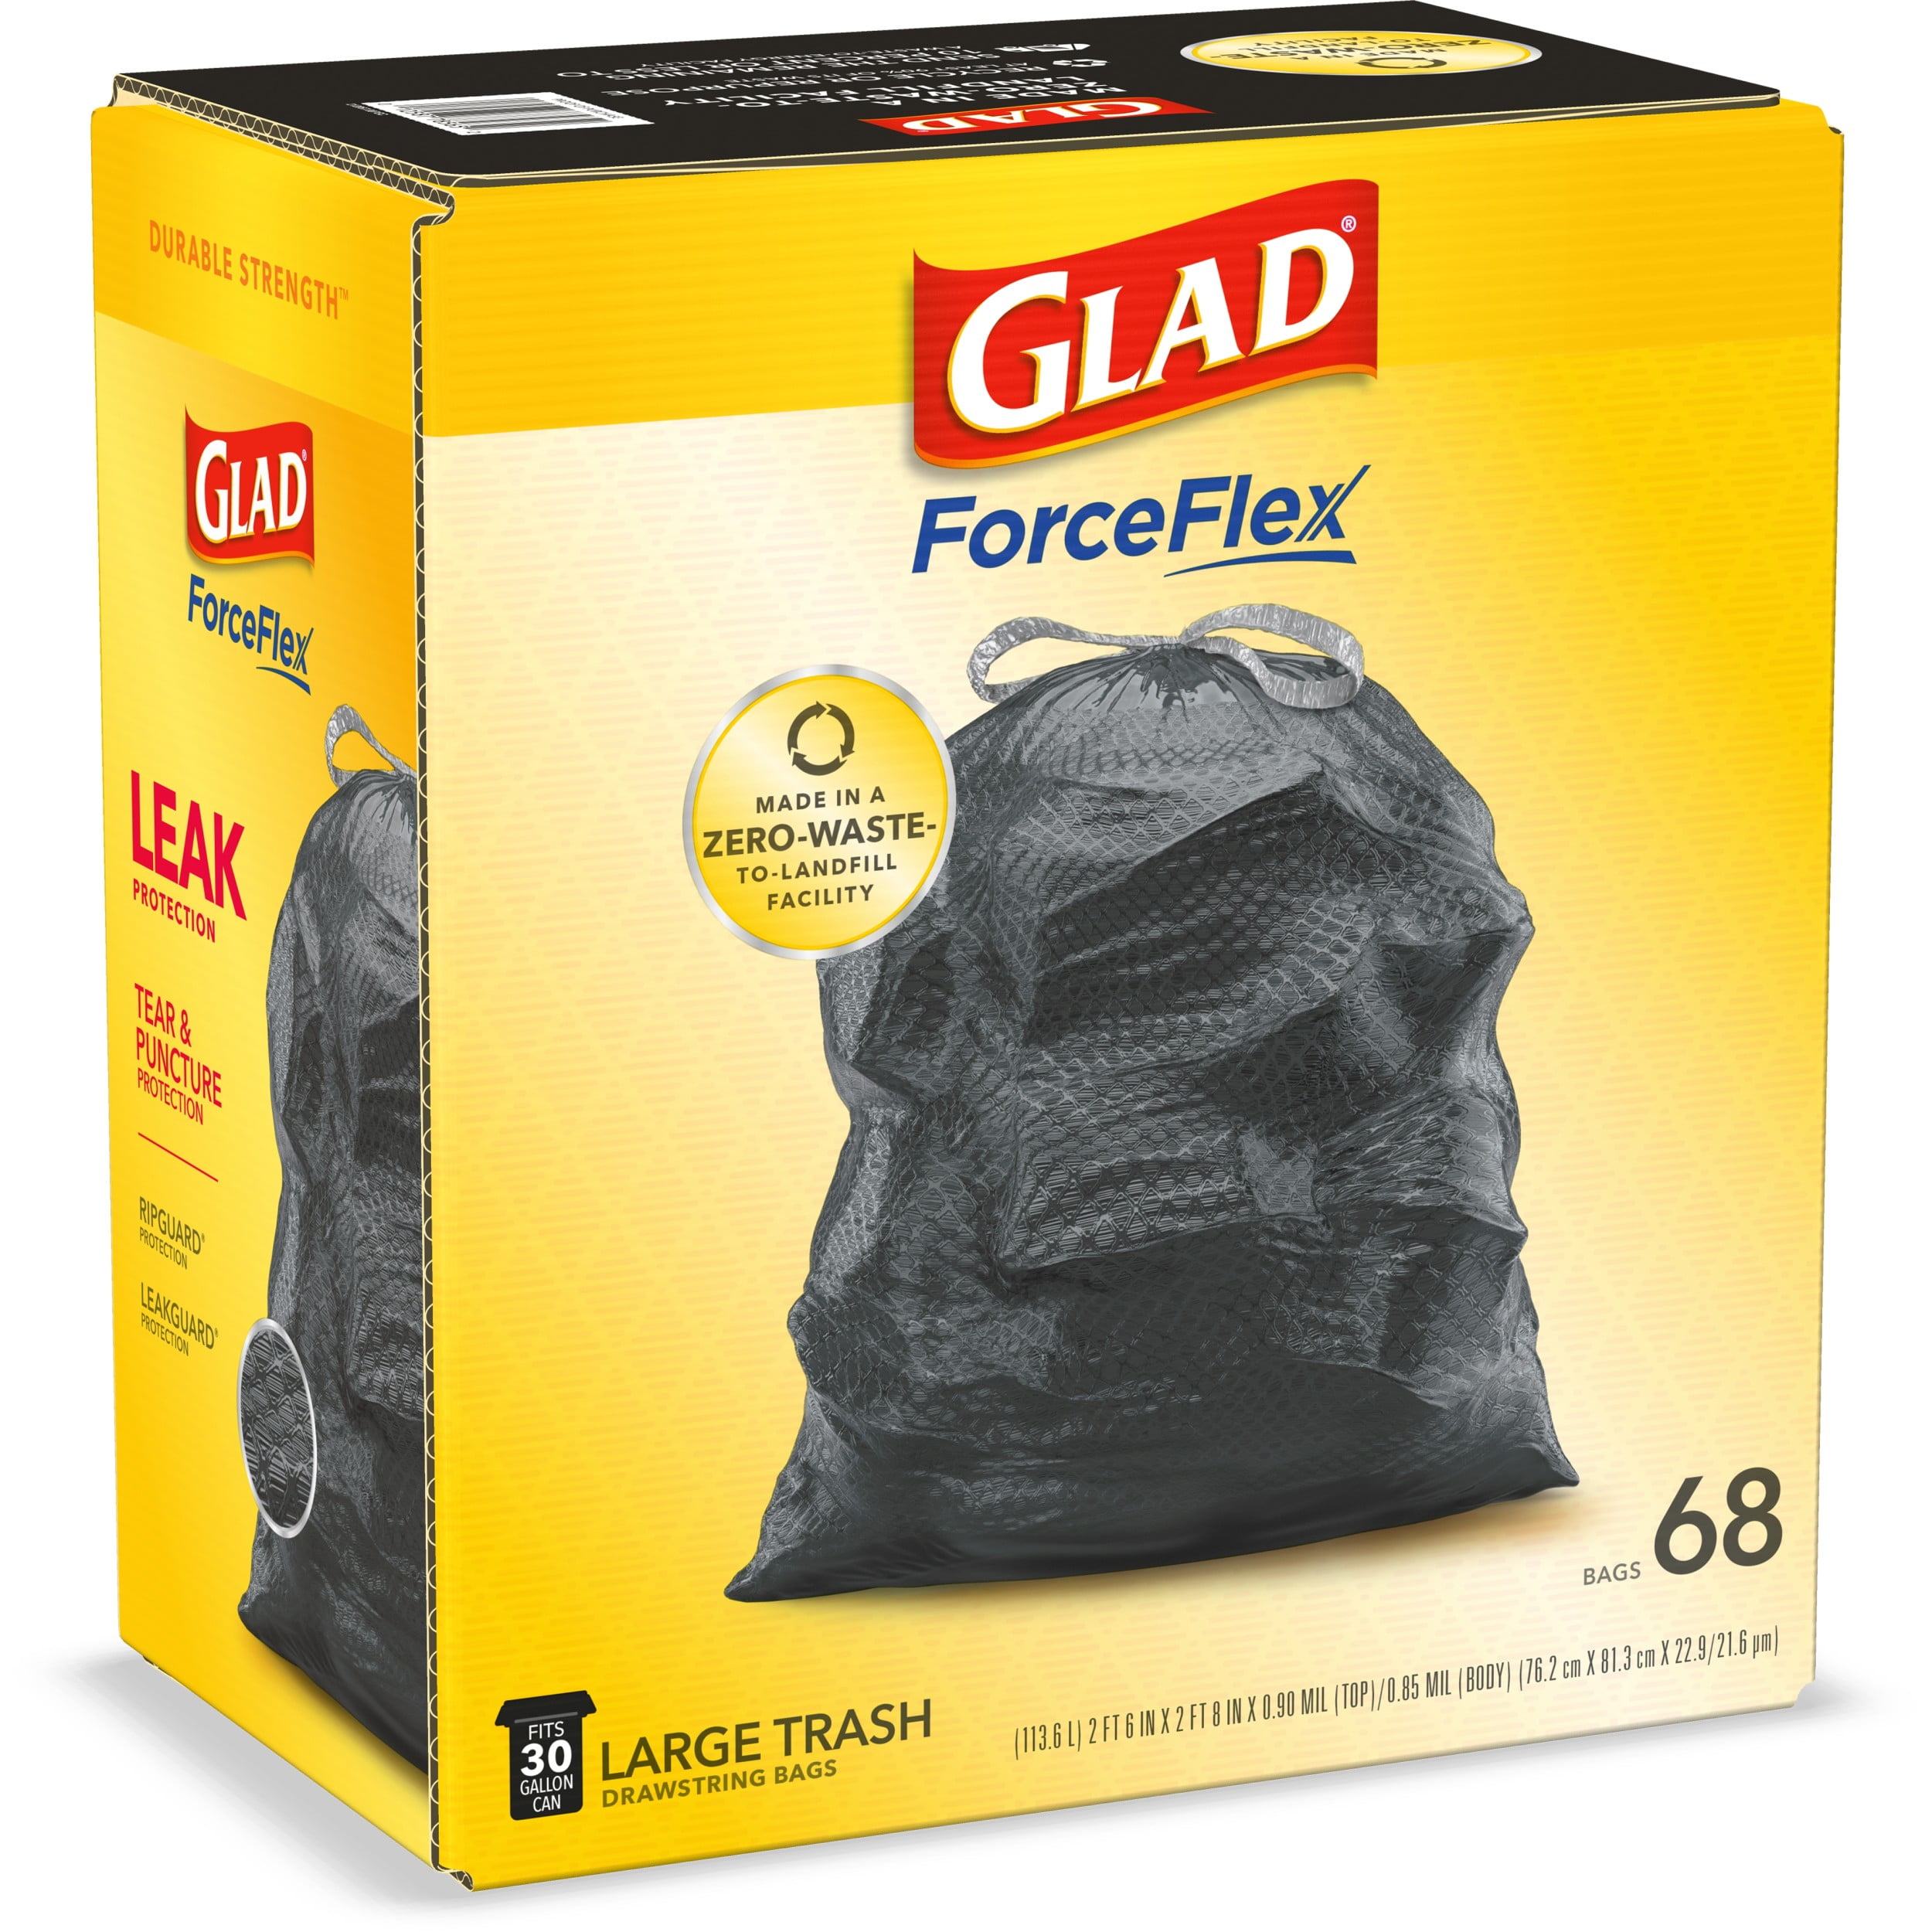 Glad Force Flex Stretchable Strength Rip Protection 30 Gallon Large  Drawstring Trash Bags 25ct